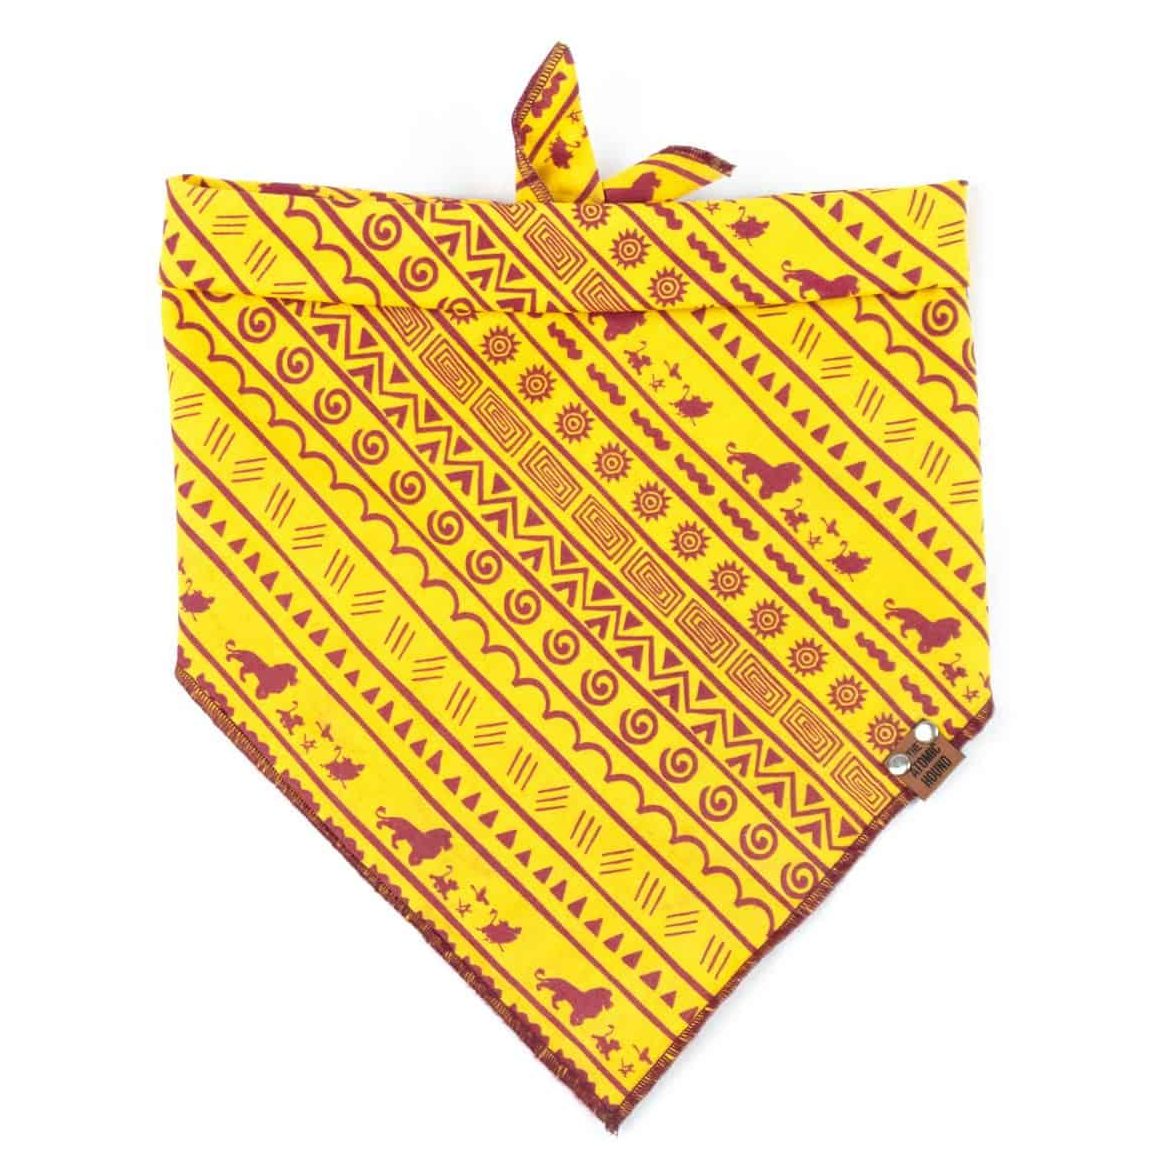 Yellow and maroon dog bandana with Lion King character pattern